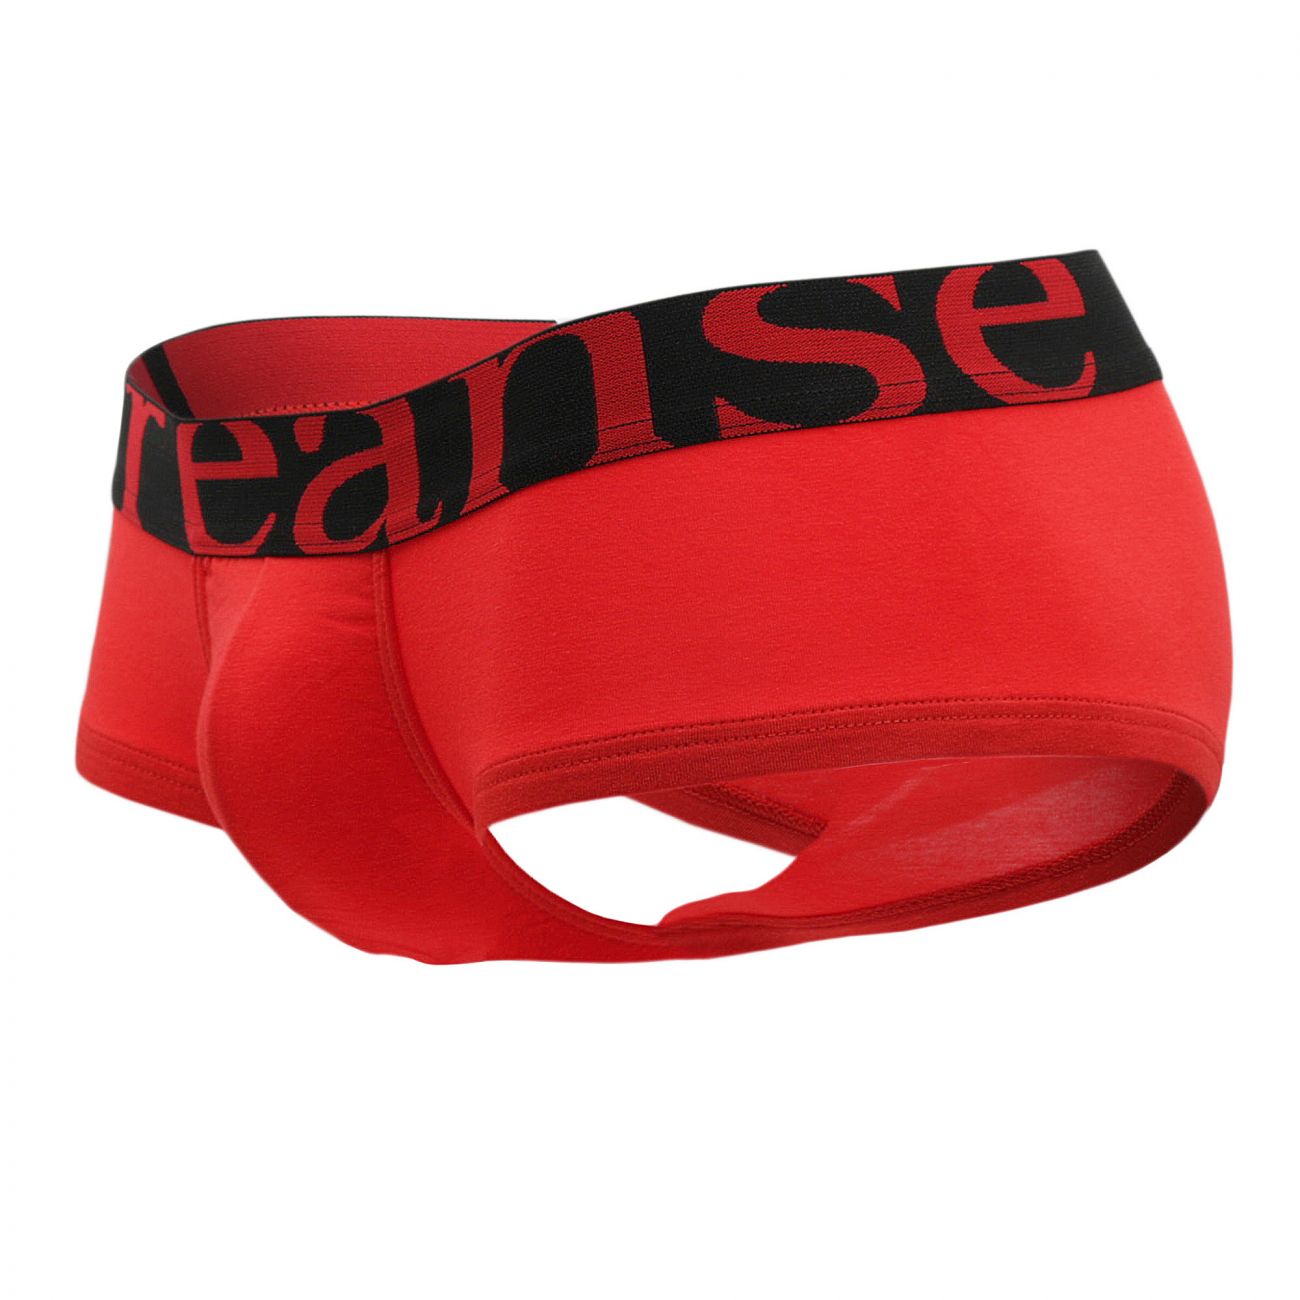 Doreanse 1779-RED Pouch Mini Trunk Color Red